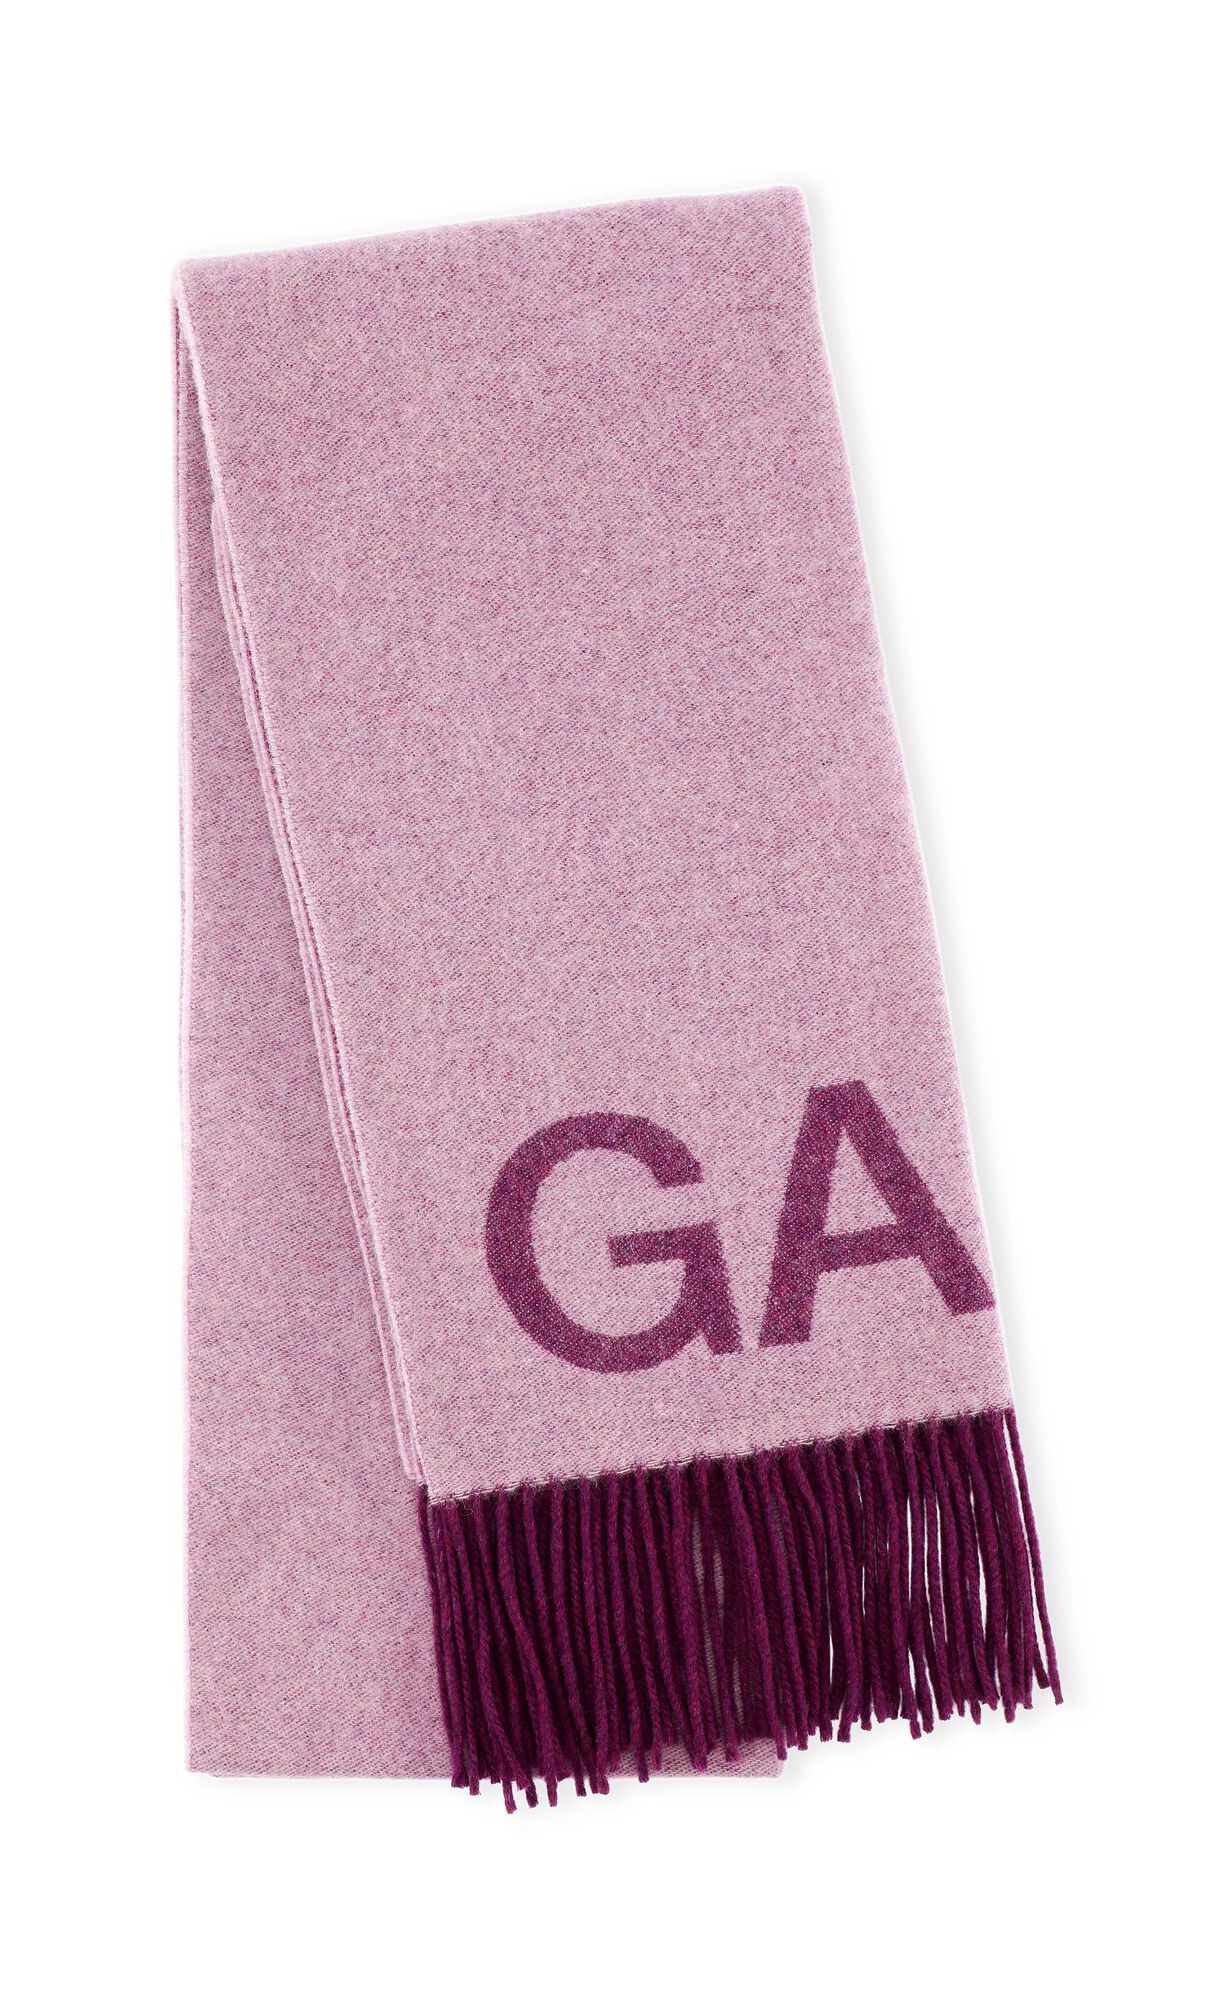 Fransenschal aus recycelter Wolle, Recycled Wool, in colour Moonlight Mauve - 1 - GANNI